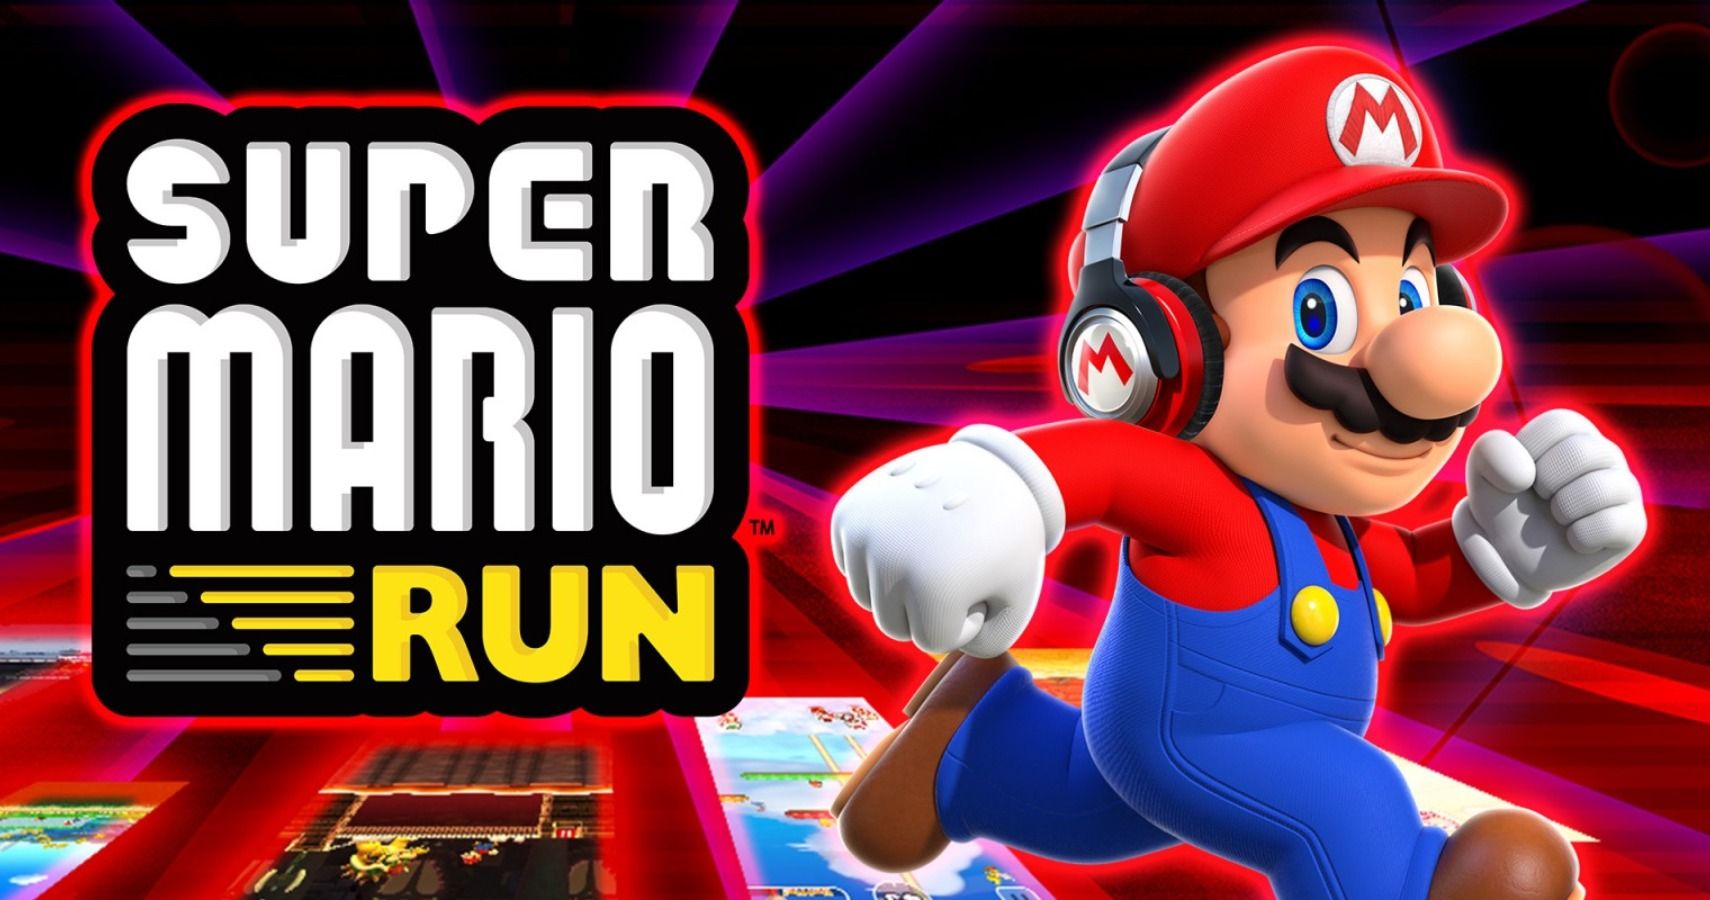 Super Mario Run review: Keep on moving